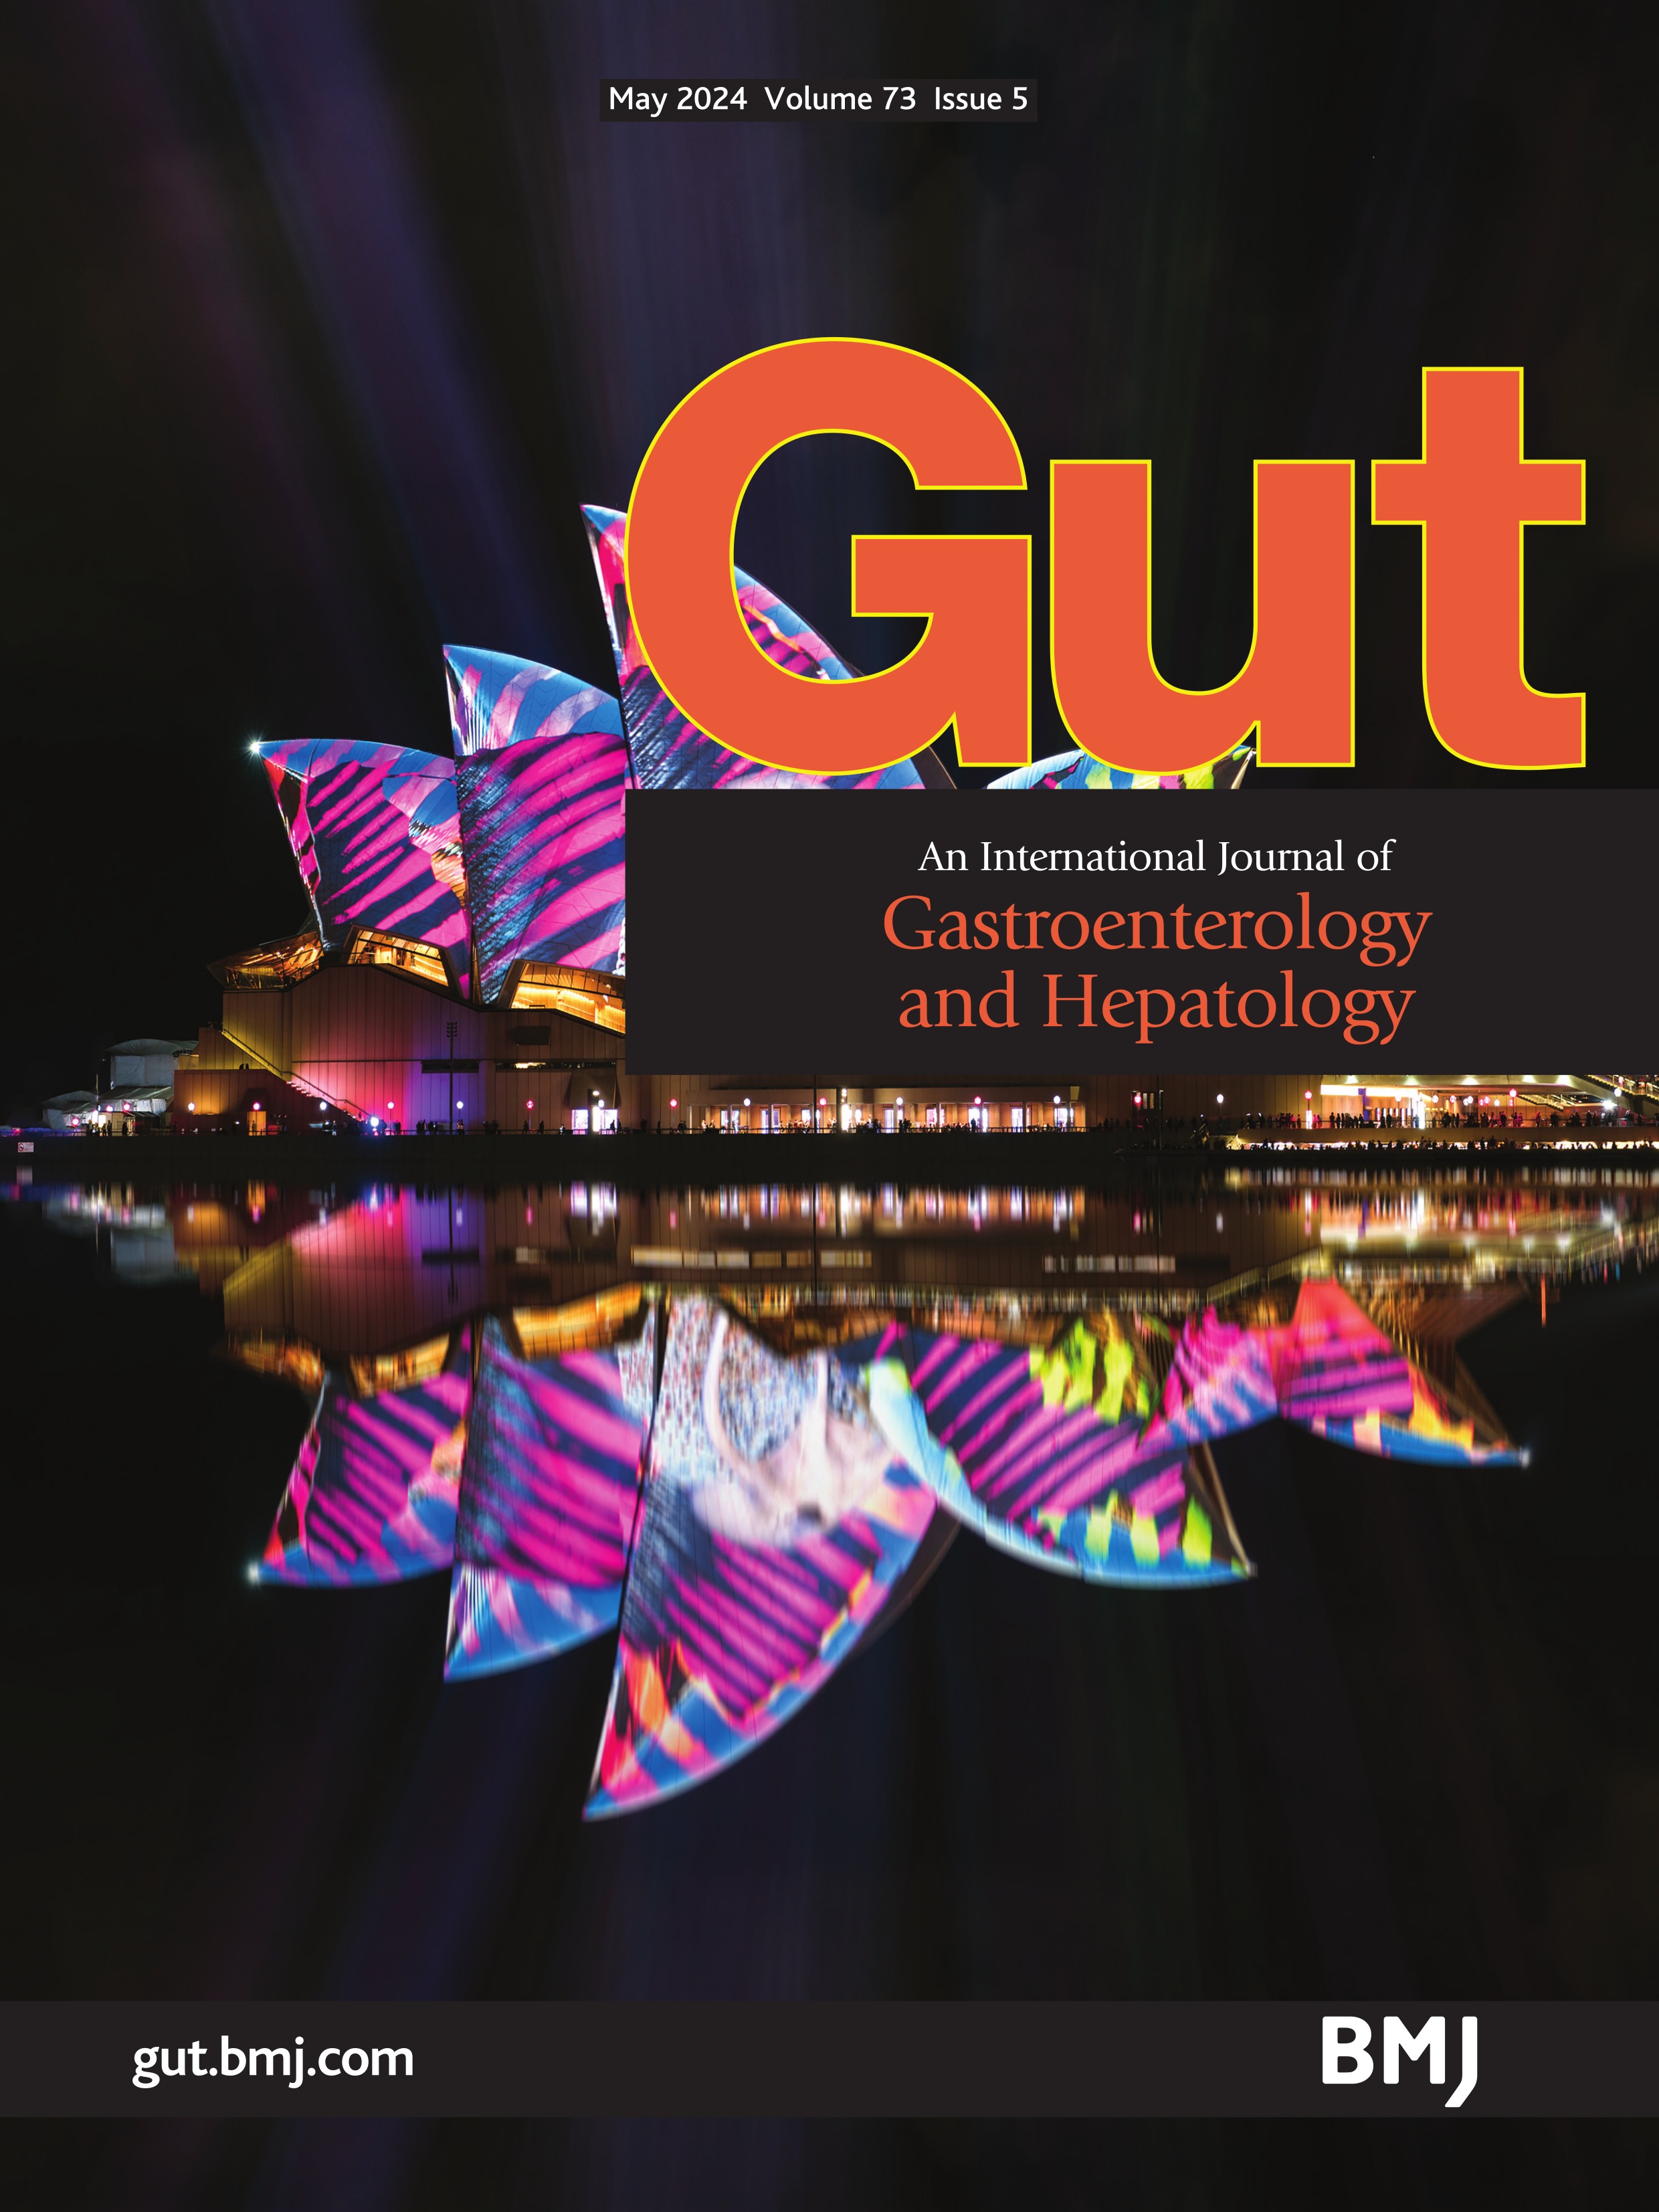 Glucagon-like peptide-1 receptor agonists and risk of major adverse liver outcomes in patients with chronic liver disease and type 2 diabetes